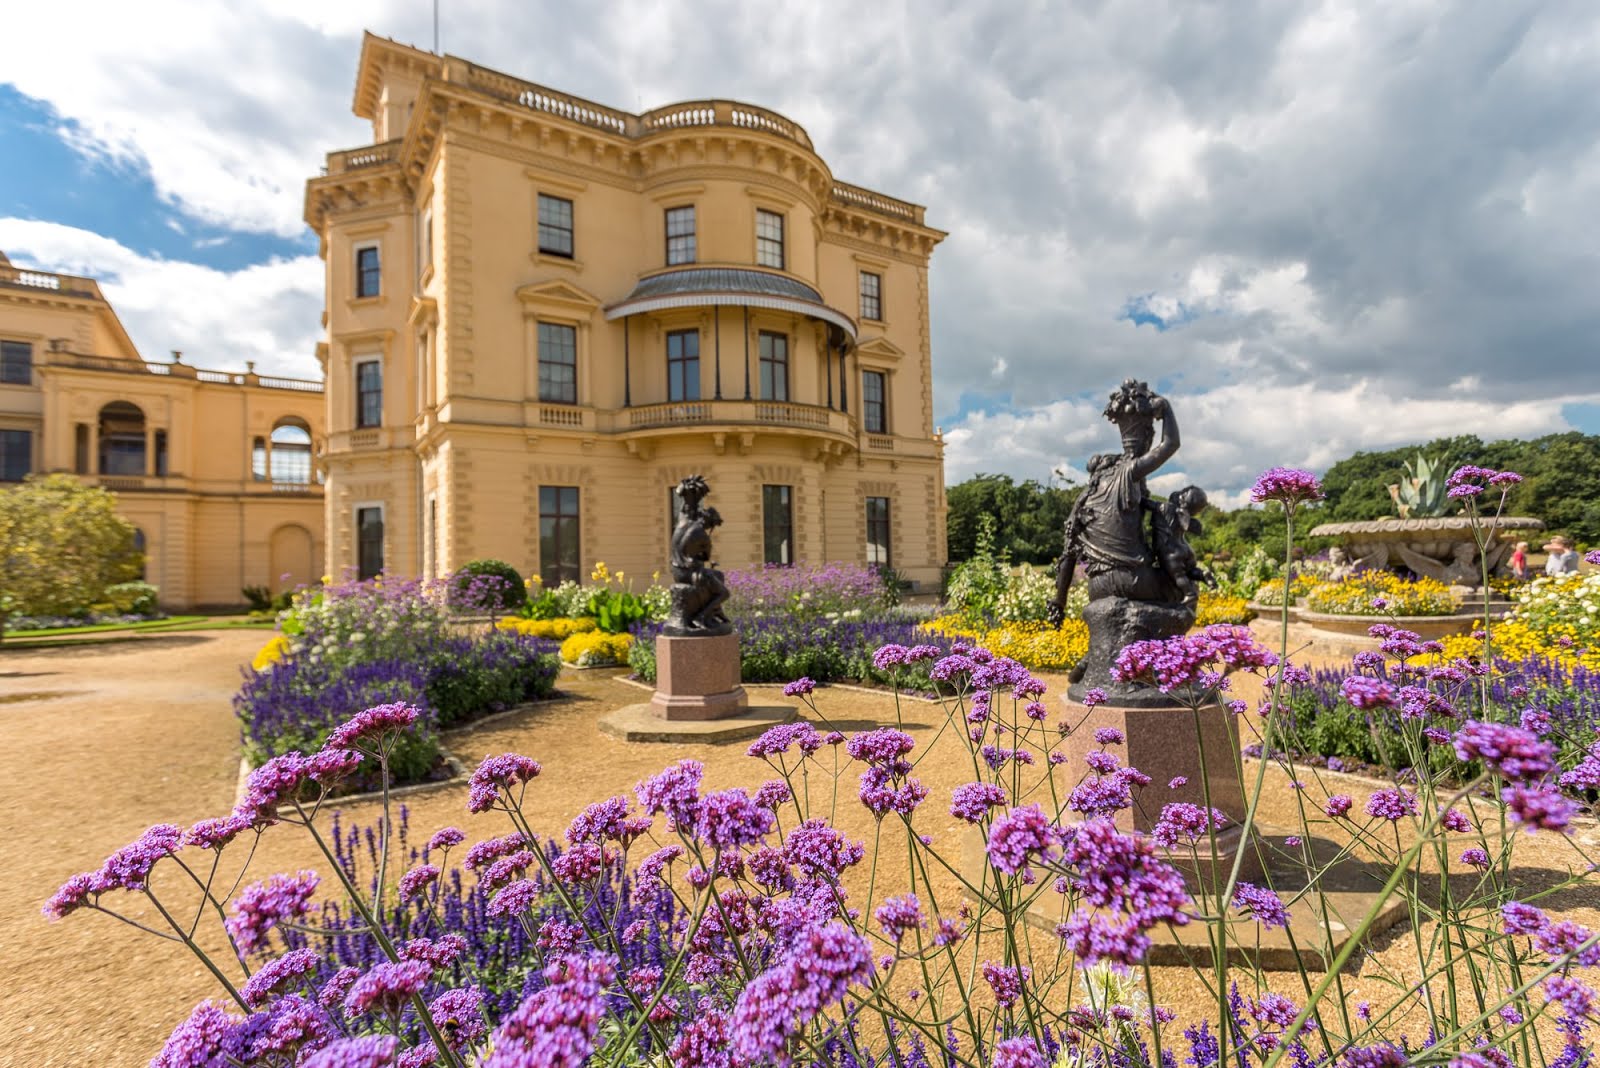 10 of The Best Stately Homes to Visit in England - Finding the Universe